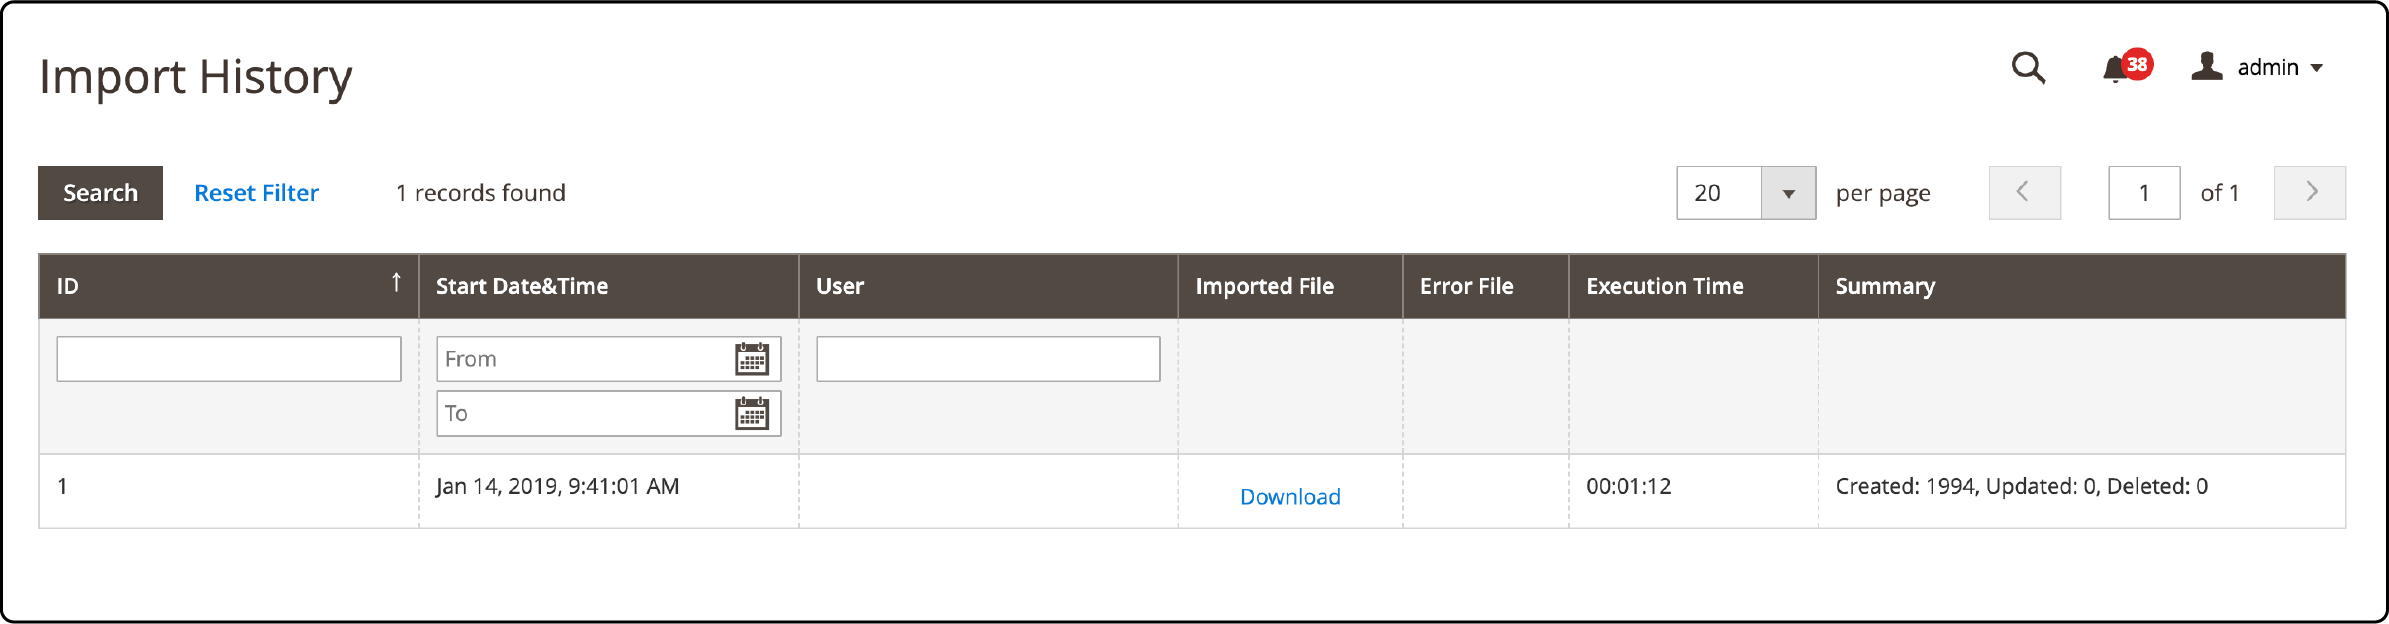 Viewing import history in Magento 2 admin